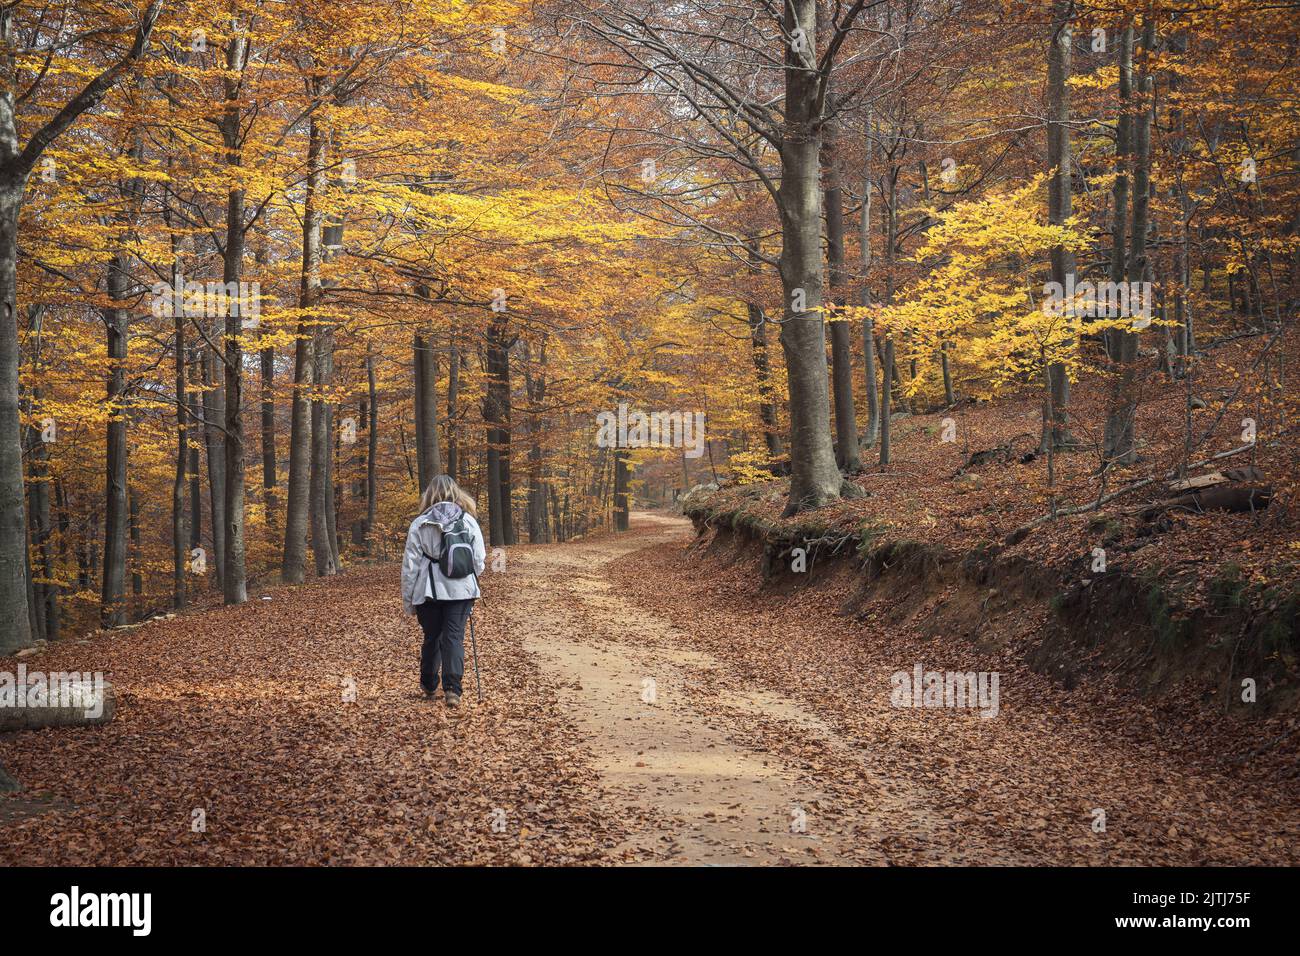 Woman Walking in a Beech Forest in Autumn Stock Photo